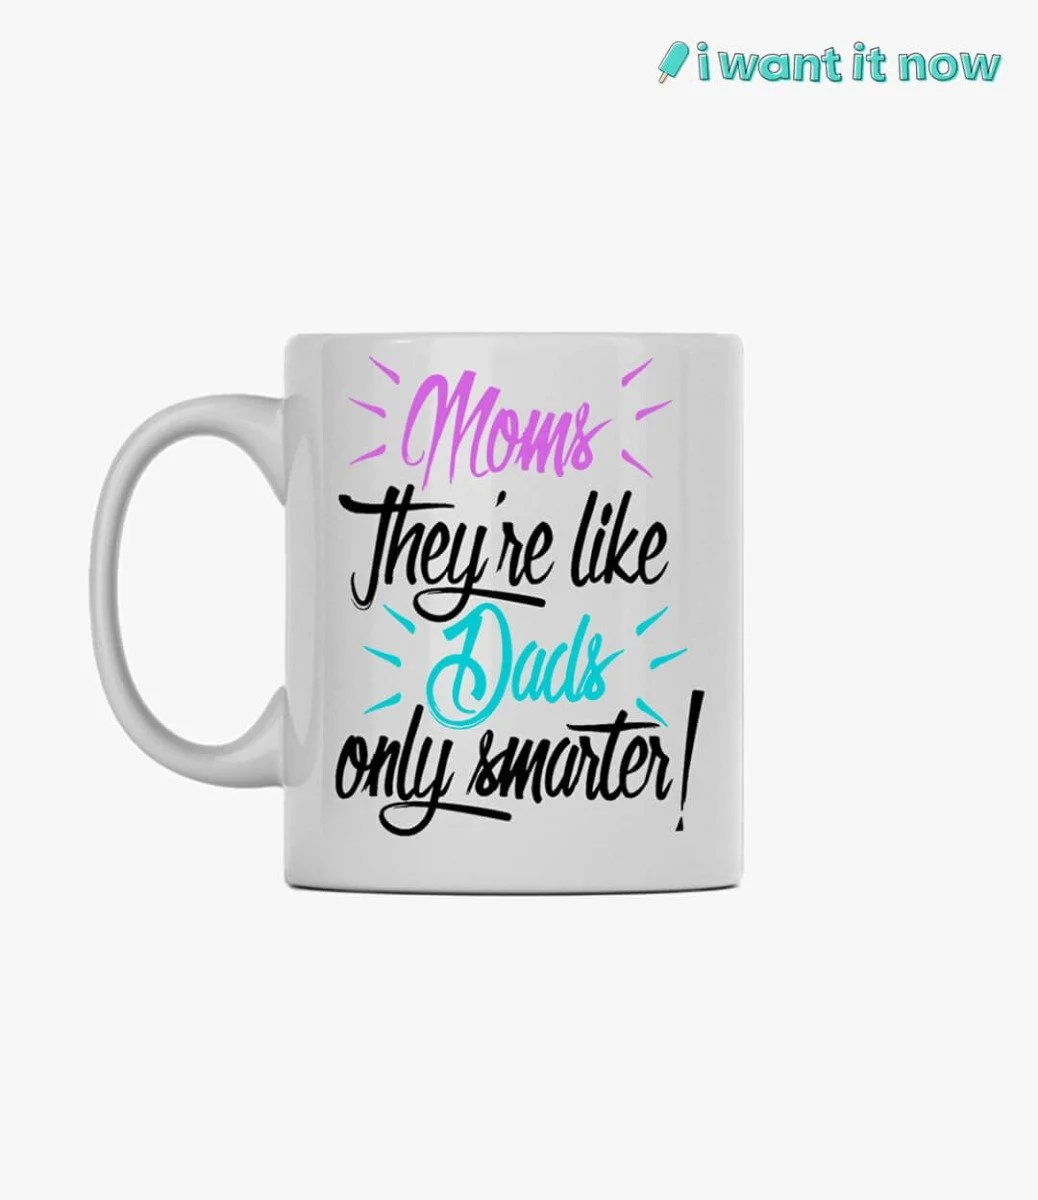 Moms they're like Dads only smarter! Mug By I Want It Now